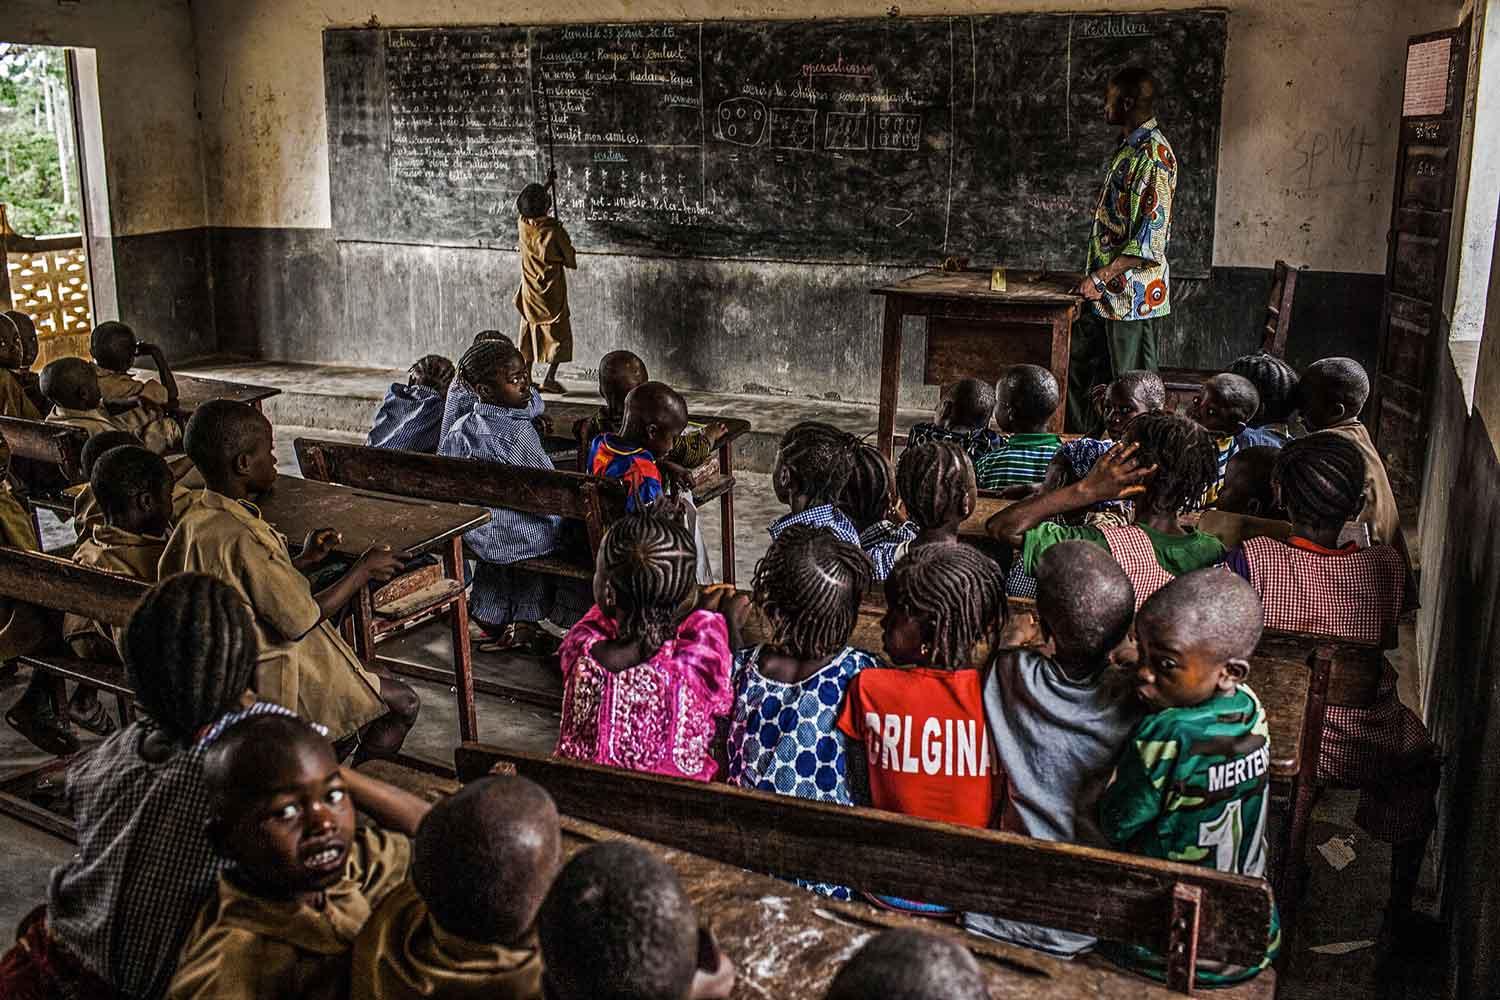 A near frame of the one Muller posted on Instagram showing the face of the young boy (lower right) wearing Dries Mertens’s soccer jersey during French lessons. The school just opened a month before, having closed for more than a year after the Ebola outbr